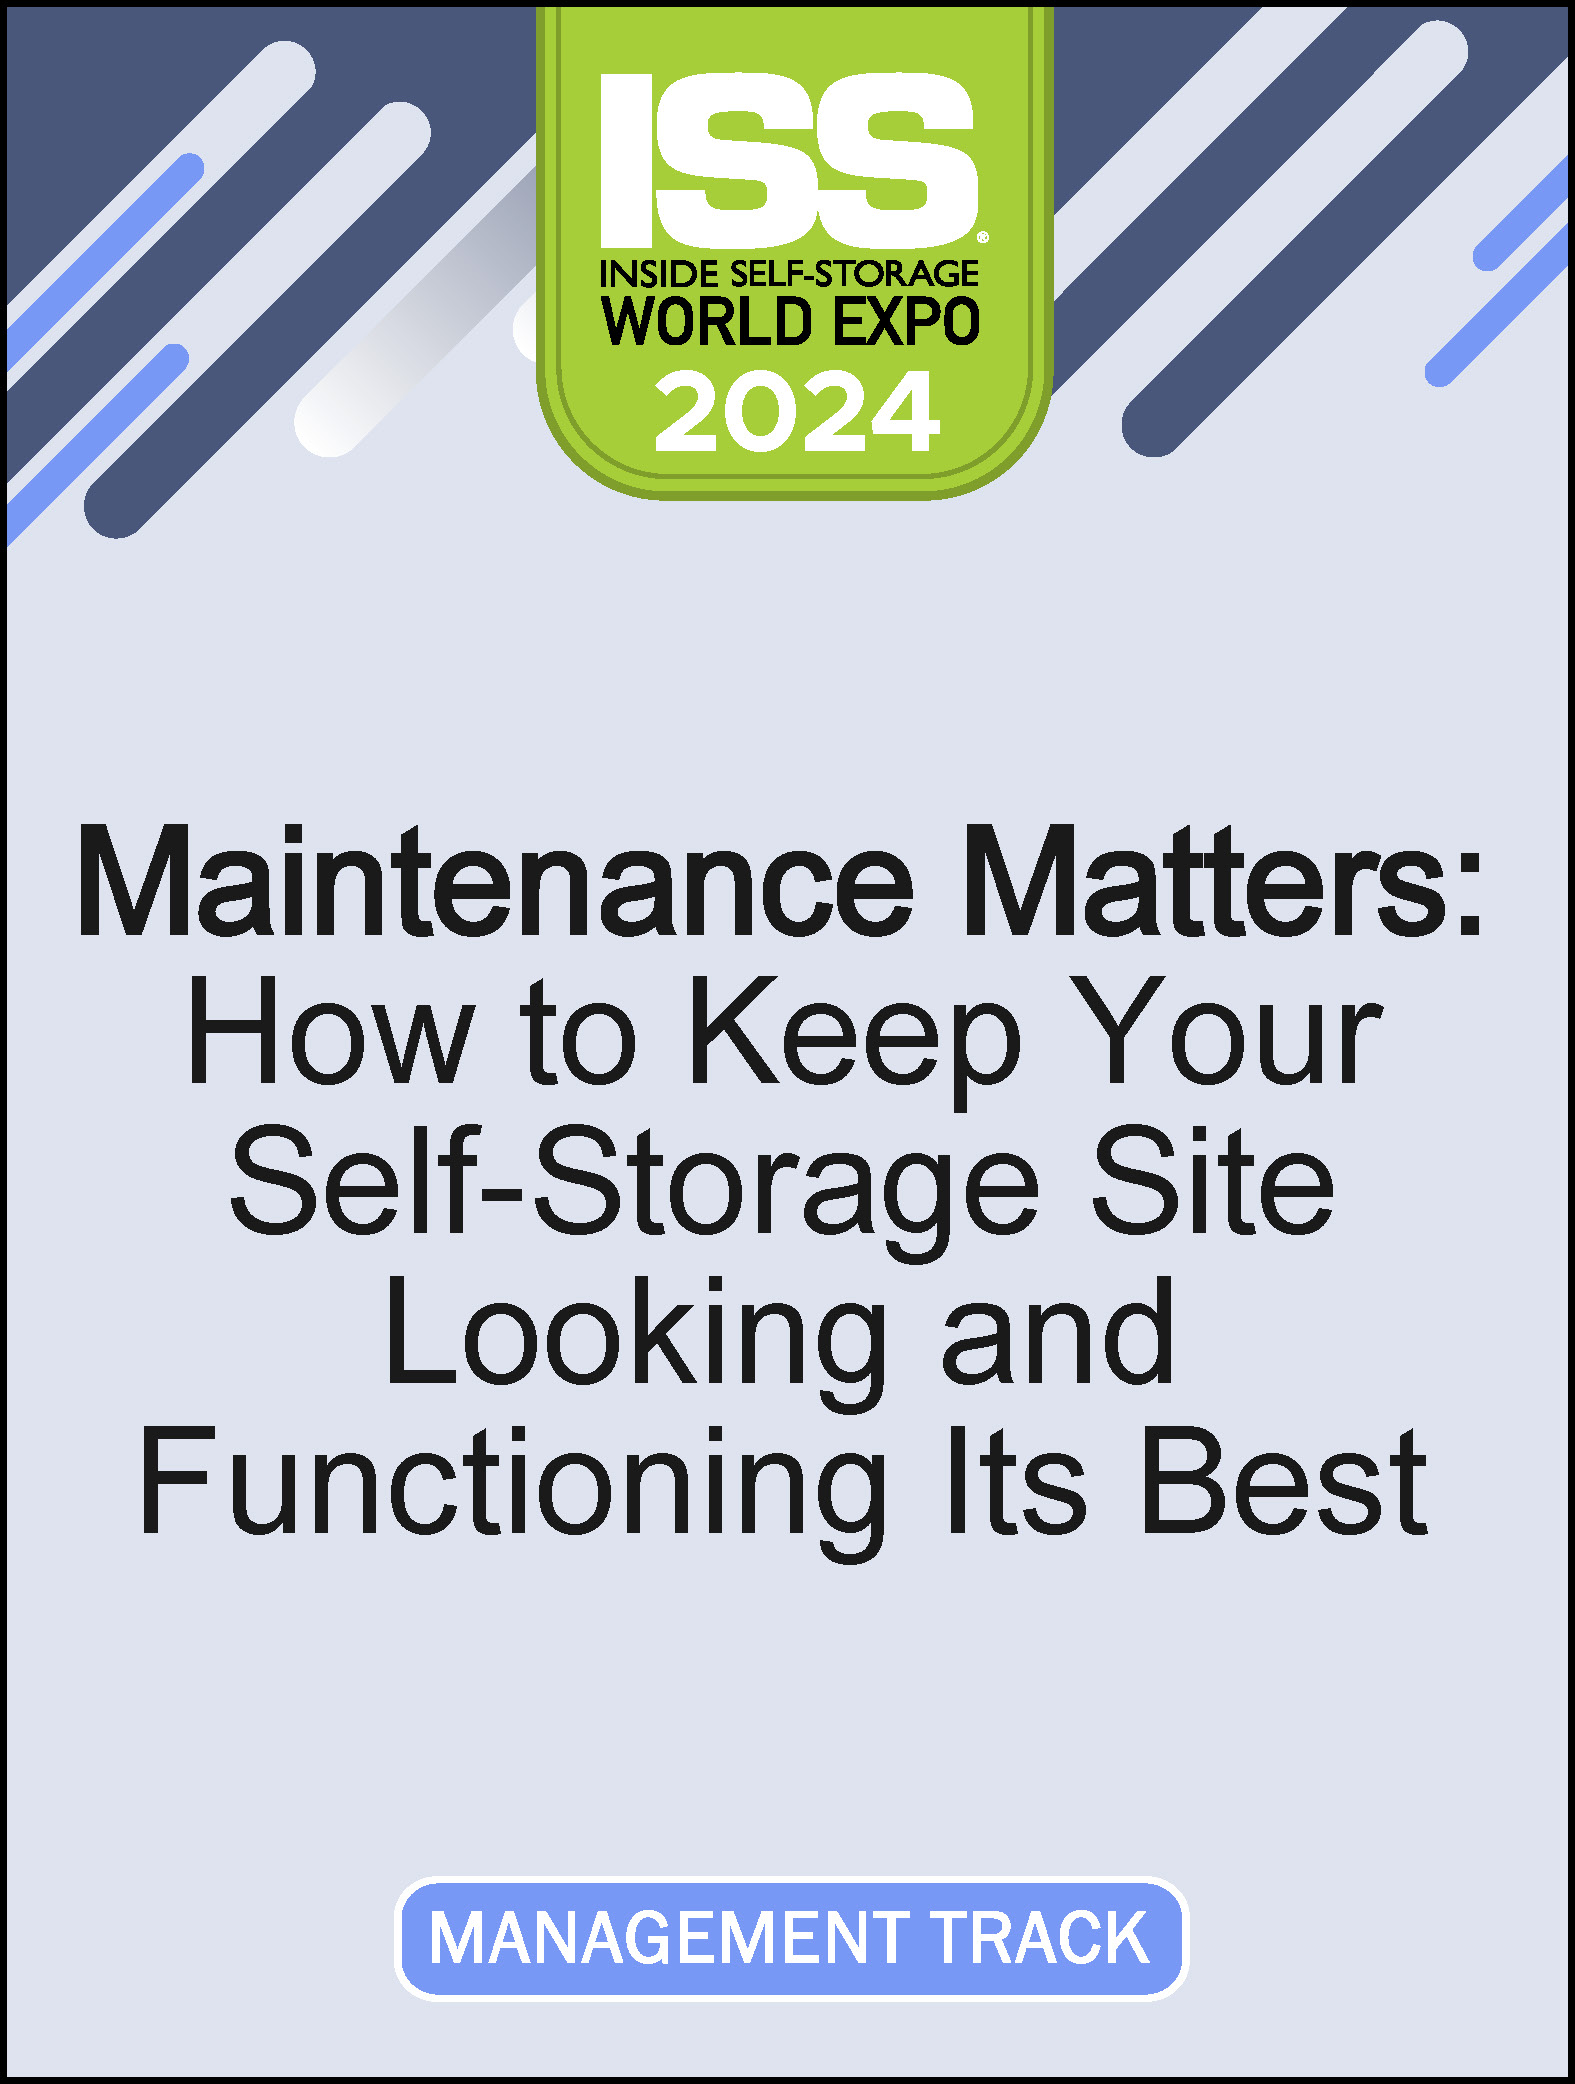 Video Pre-Order - Maintenance Matters: How to Keep Your Self-Storage Site Looking and Functioning Its Best